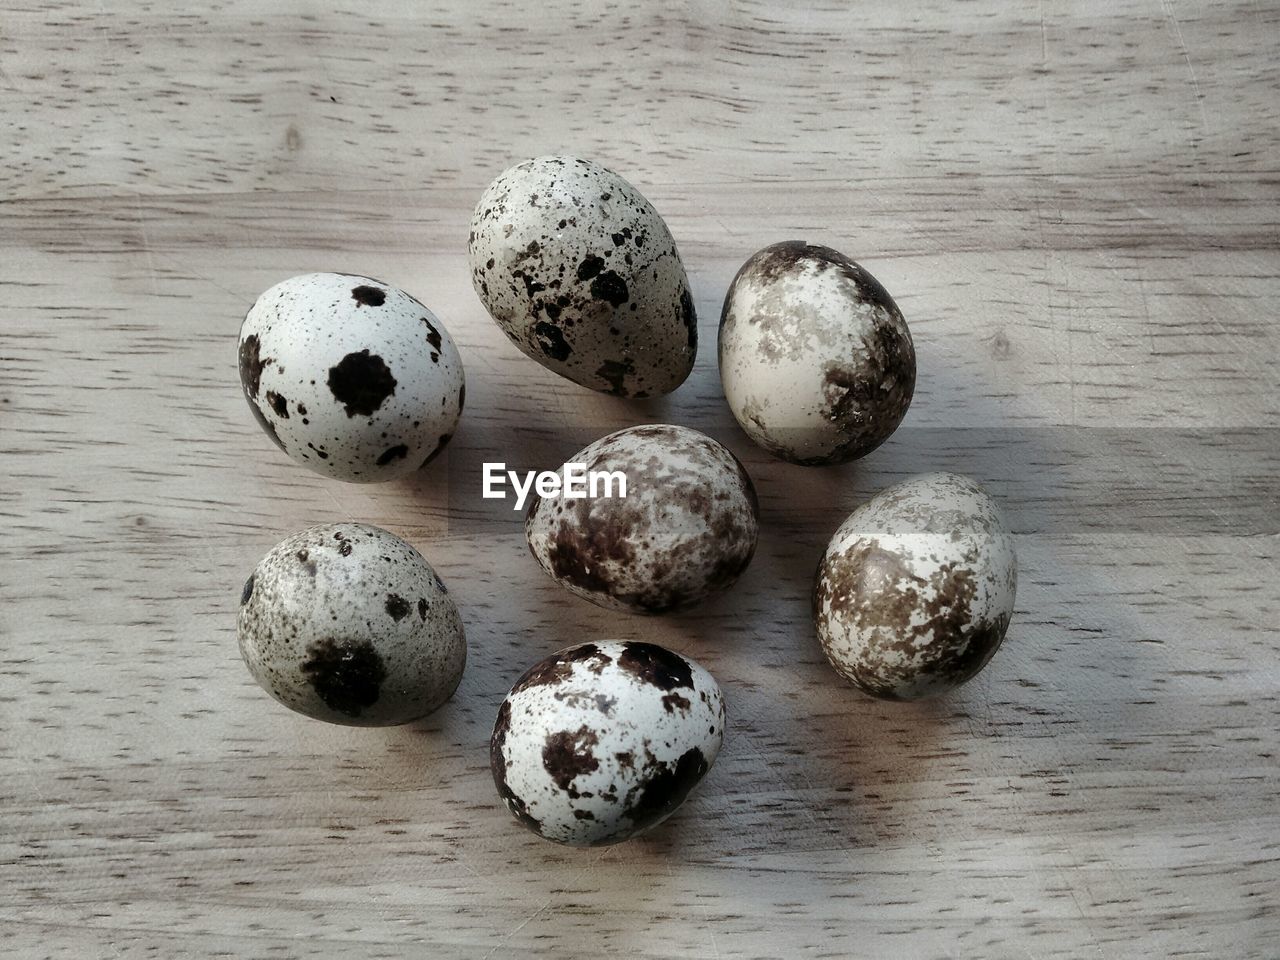 Close-up of bird eggs on table